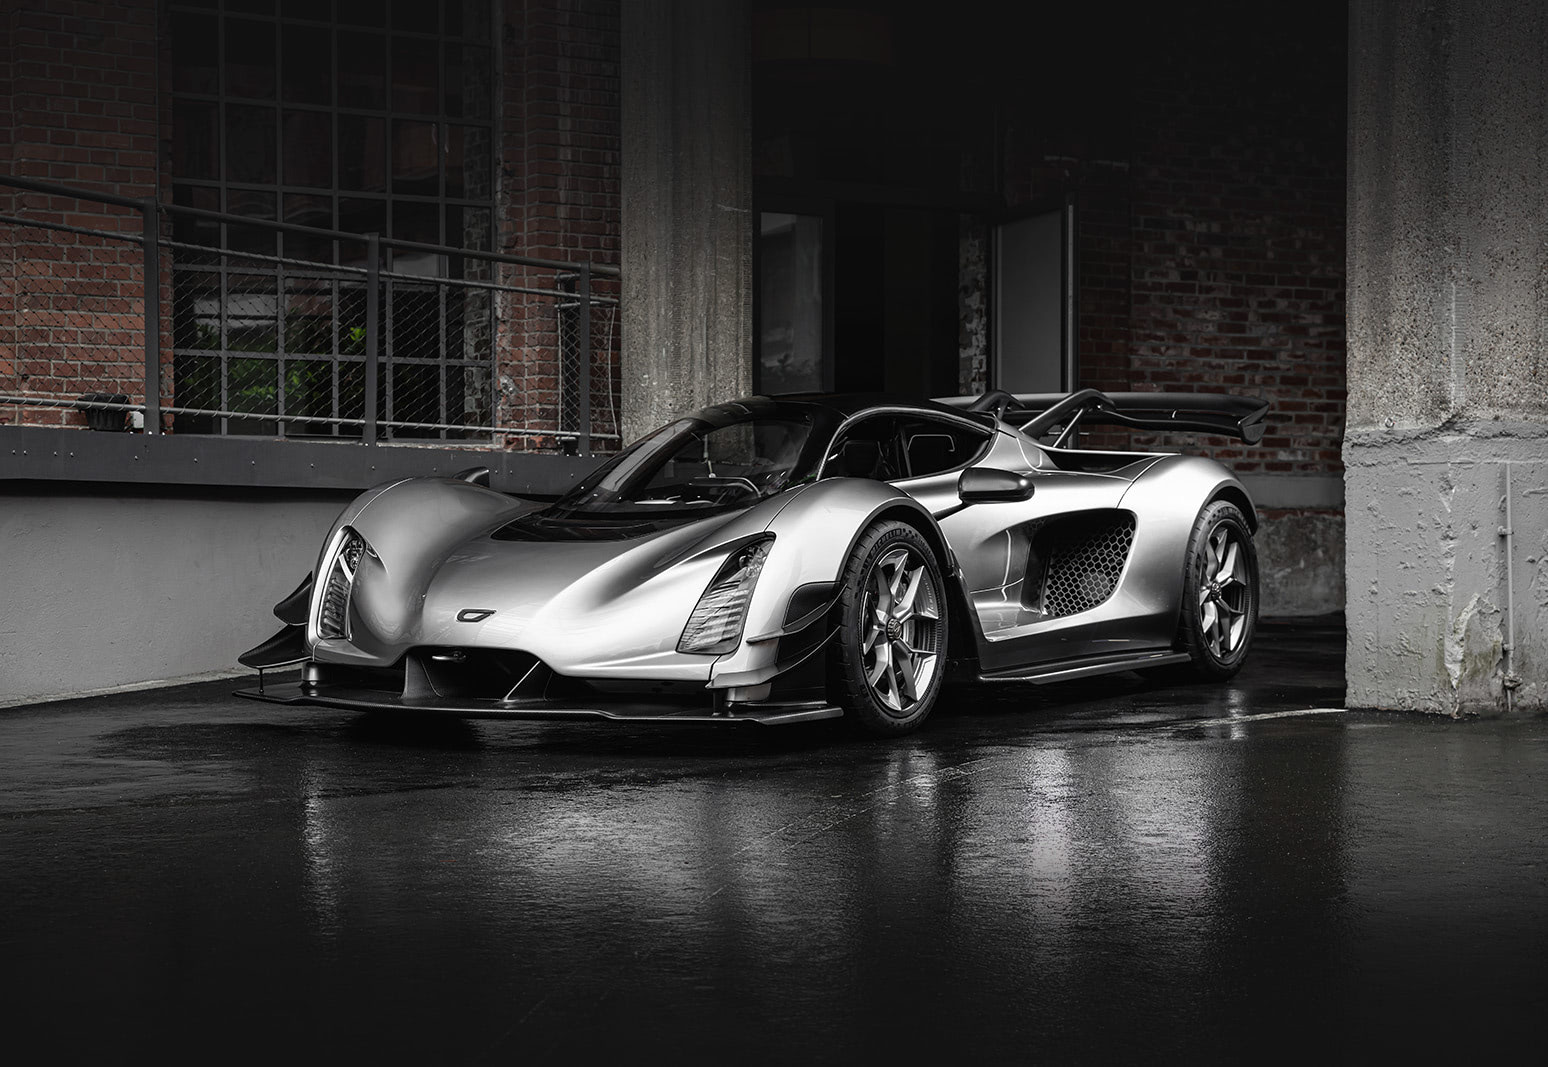 The Czinger 21C hypercar is designed, manufactured and assembled in Los Angeles, California using the world's most advanced production technologies.